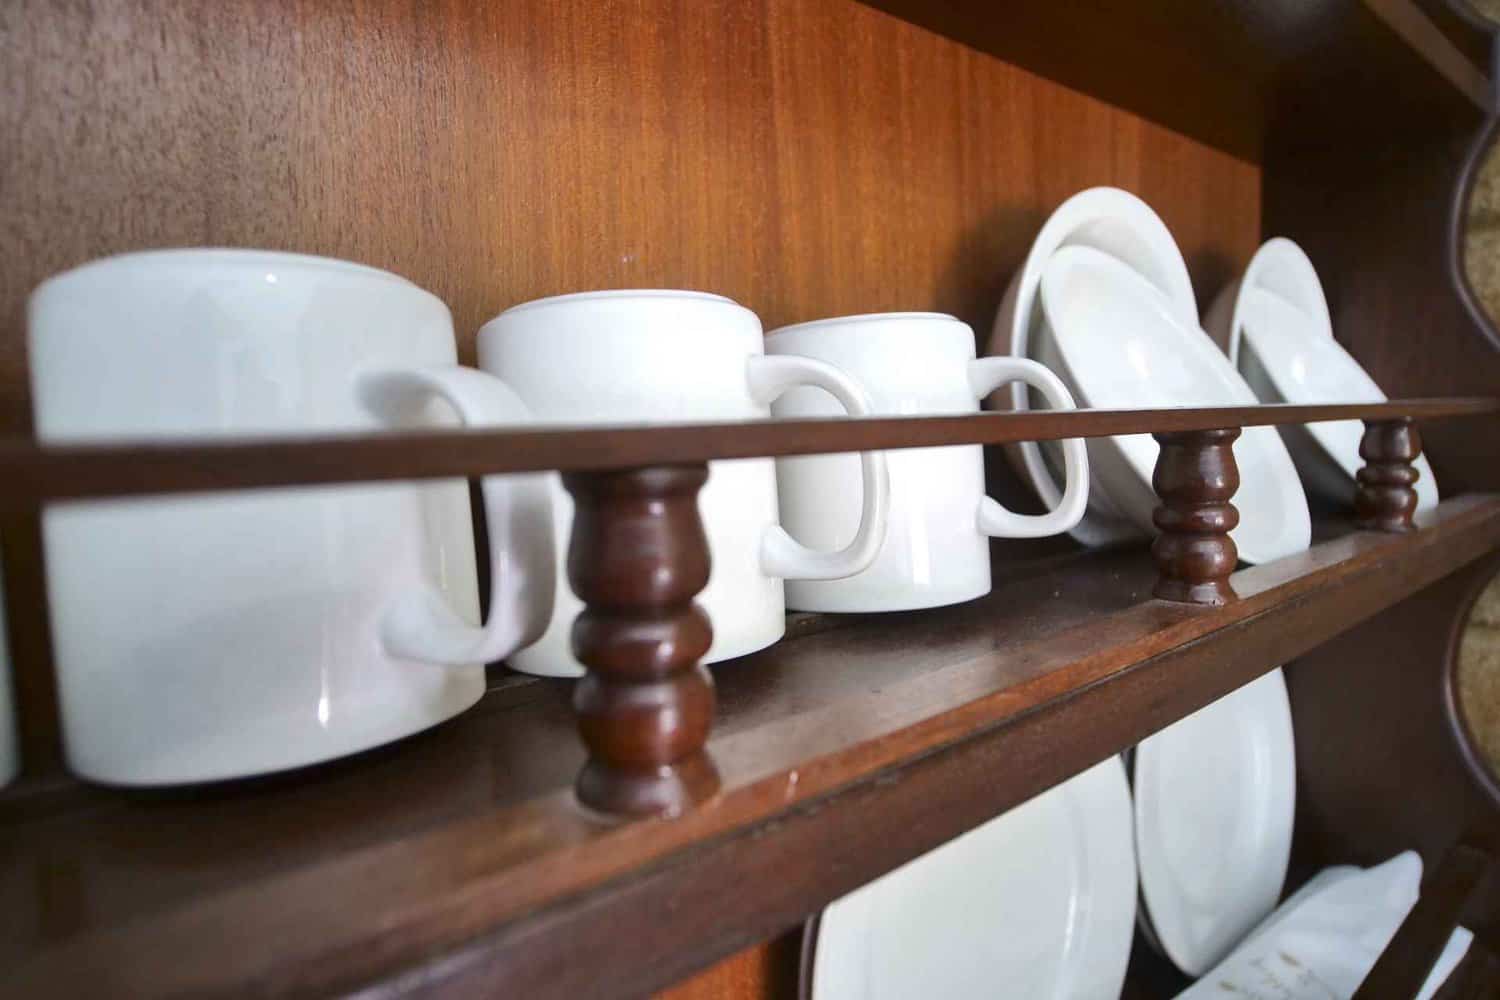 Neatly arranged mugs, plates, bowls, and cutlery on display in a hotel room, showcasing the amenities provided for guests considering extended stays at the hotel